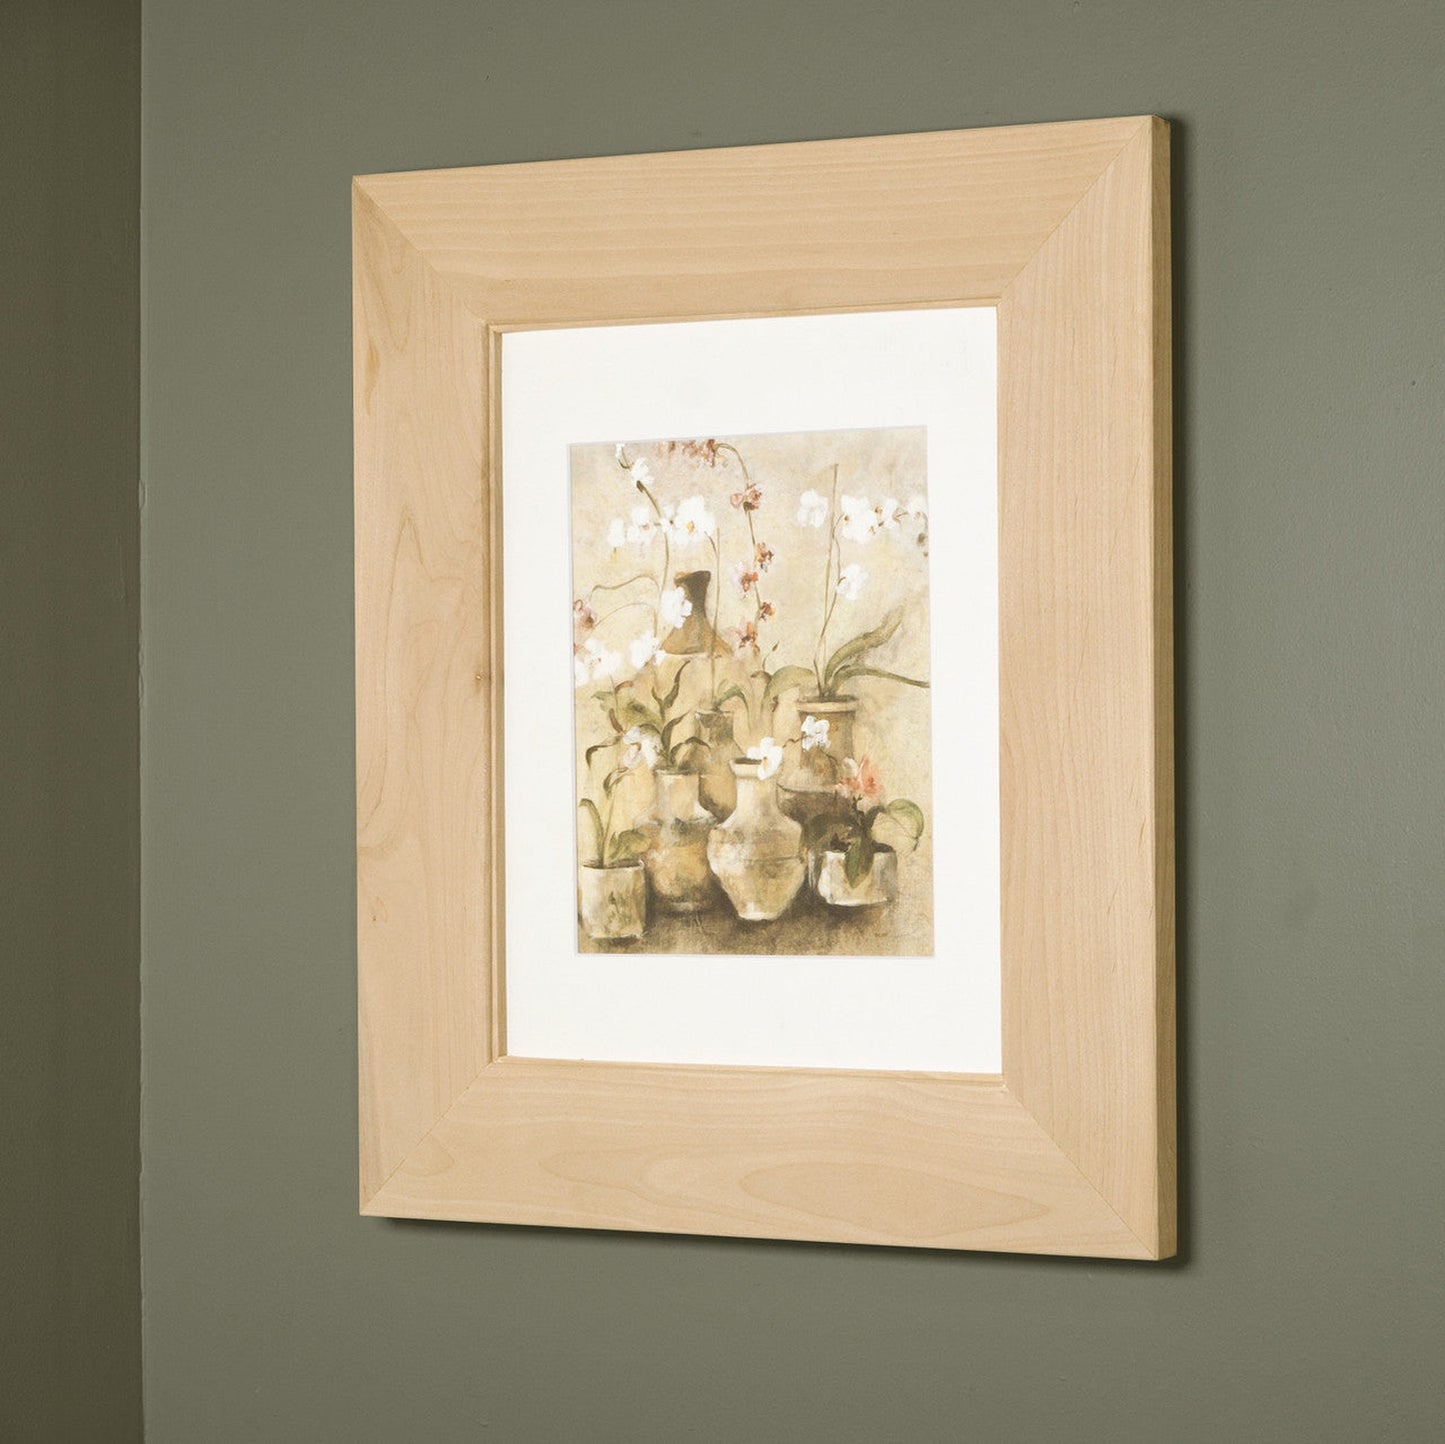 Fox Hollow Furnishings 14" x 16" Regular Unfinished Special 3" Depth Recessed Picture Frame Medicine Cabinet